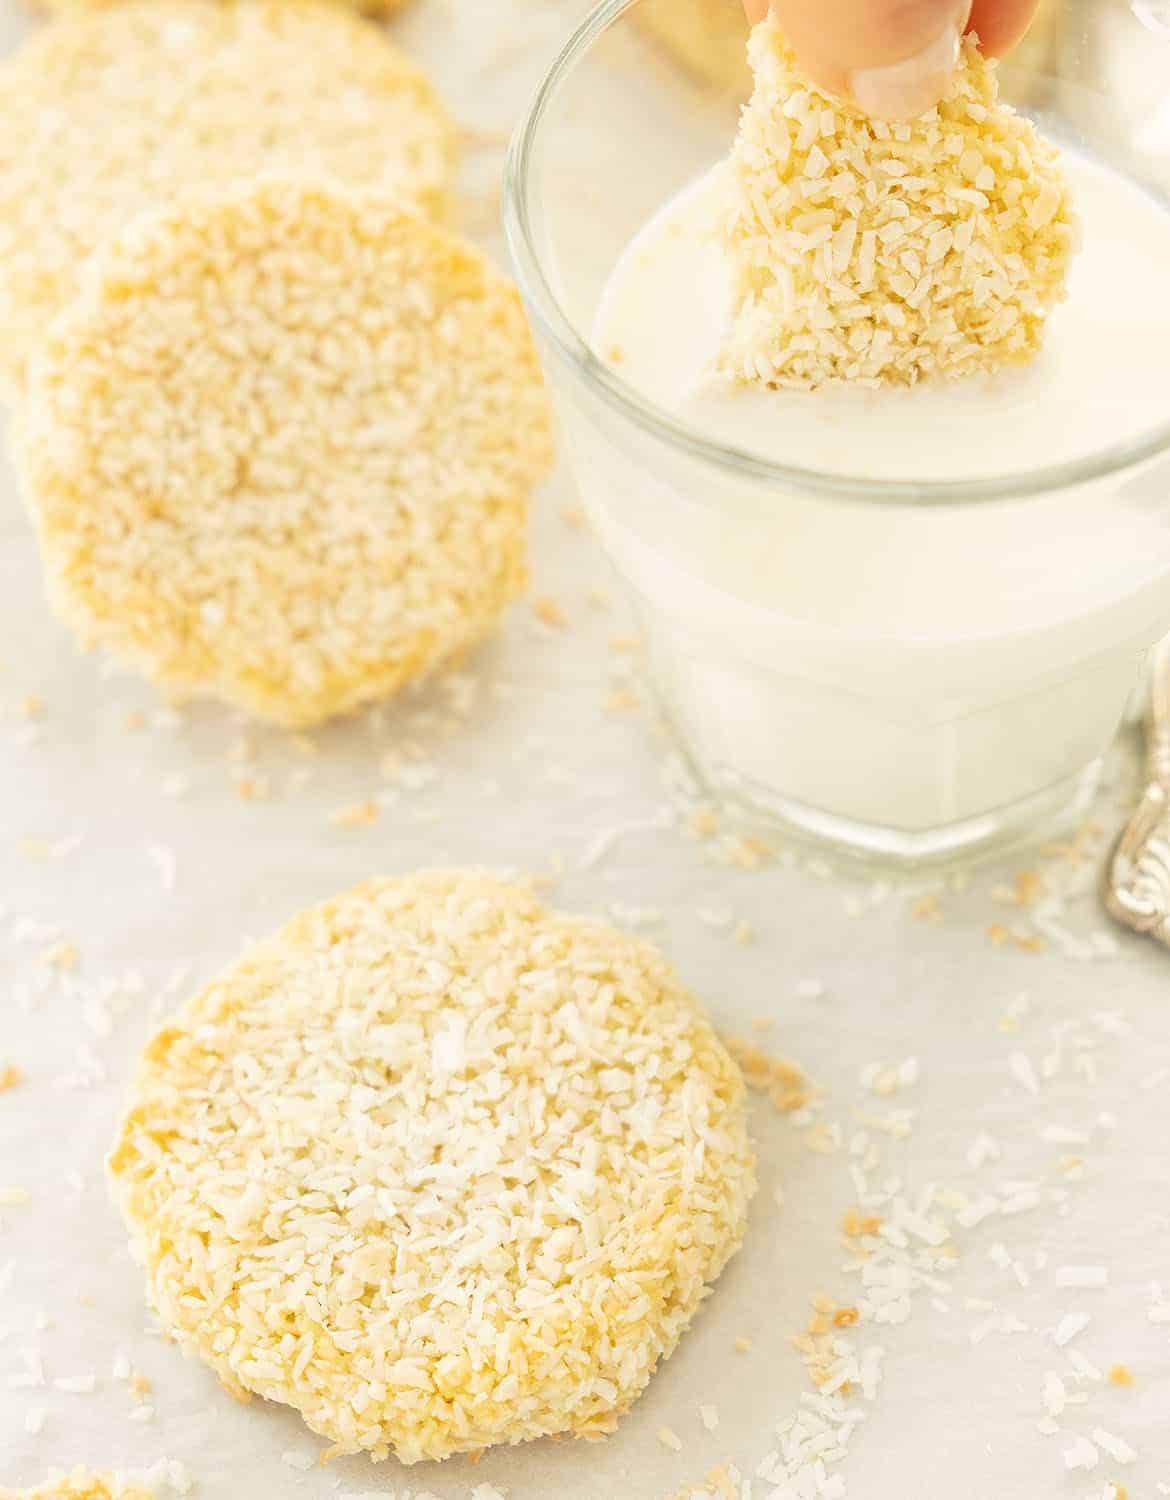 Coconut cookies and a glass of milk over a white background.